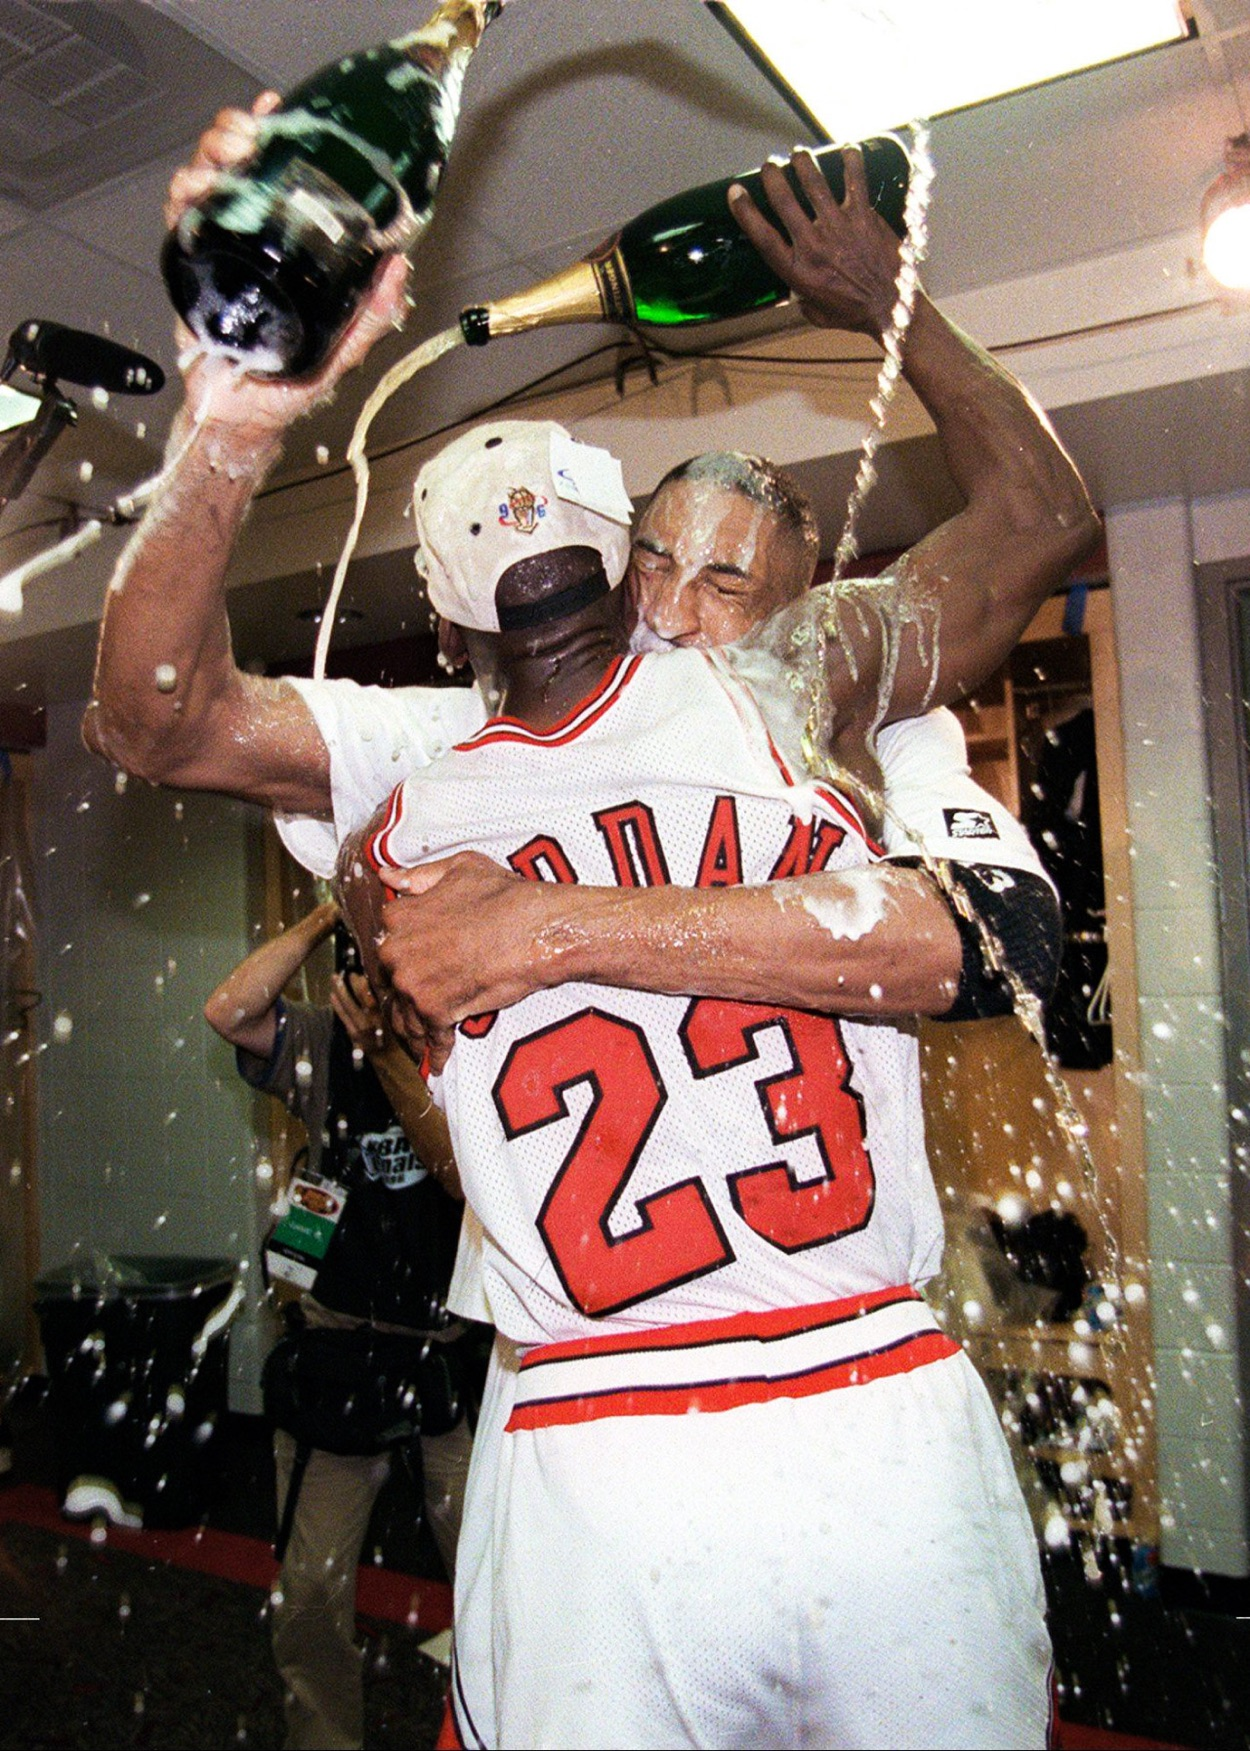 The Chicago Bulls will induct Michael Jordan, Scottie Pippen, and Dennis Rodman into the inaugural Ring of Honor